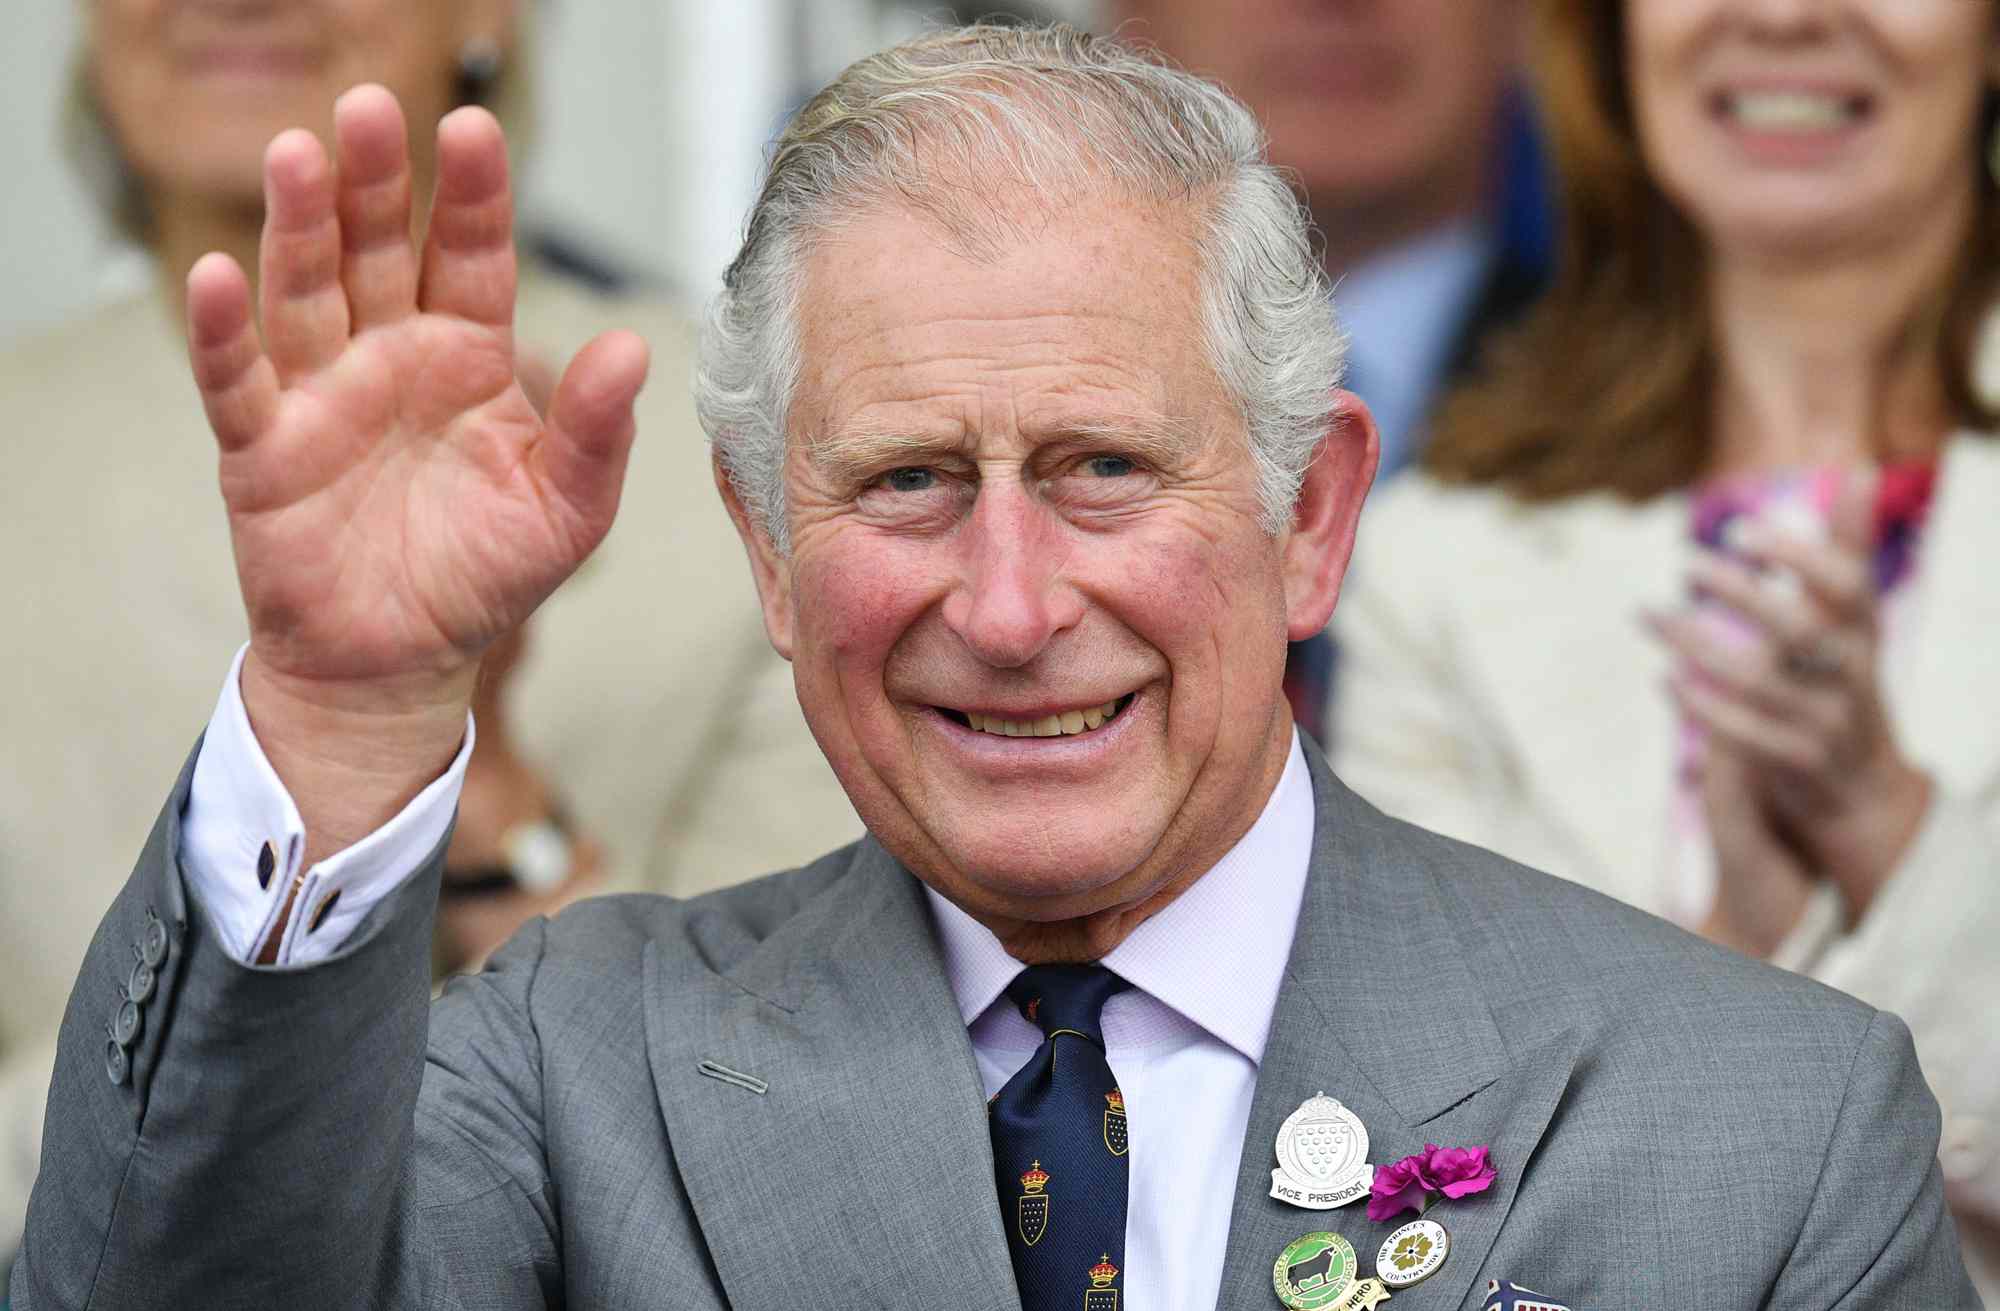 Prince Charles, Prince of Wales waves as he attends the Royal Cornwall Show on June 07, 2018 in Wadebridge, United Kingdom